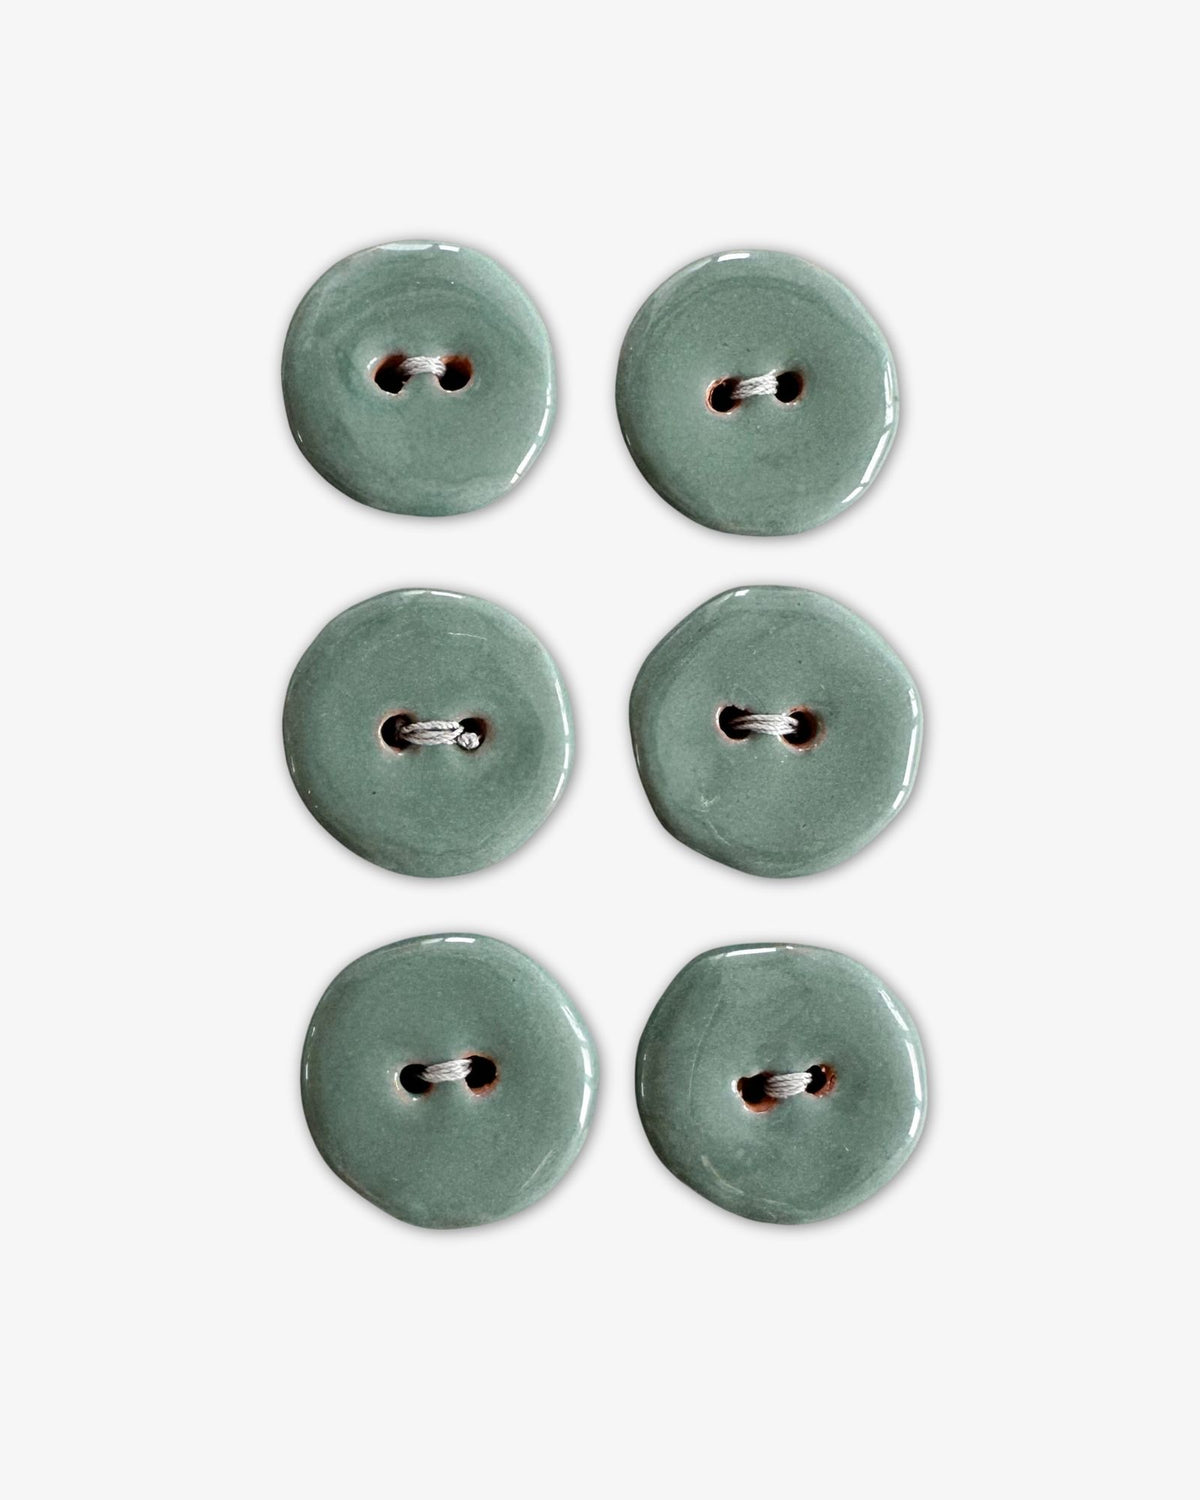 Large Ceramic Buttons by Studio Carta | Tolemaide